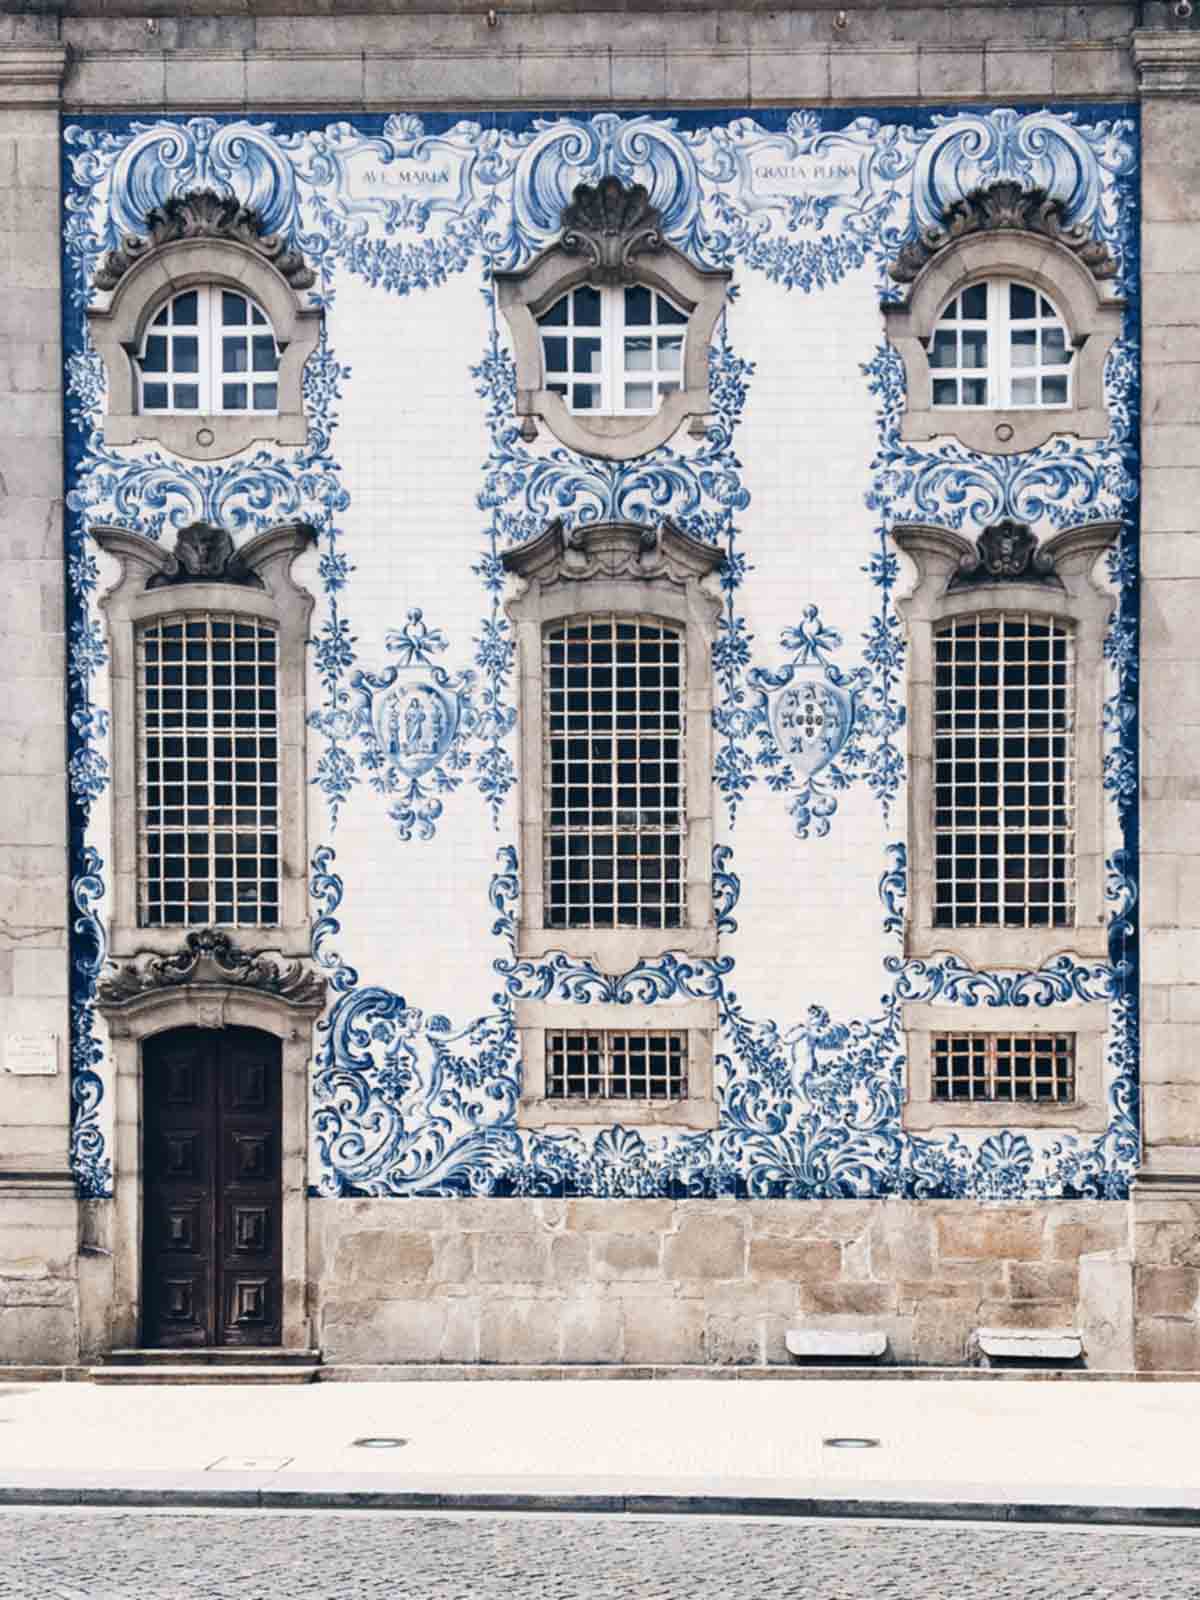 The facade of Carmelites church in Oporto portugal is decorated with hand-painted Azulejos Tiles